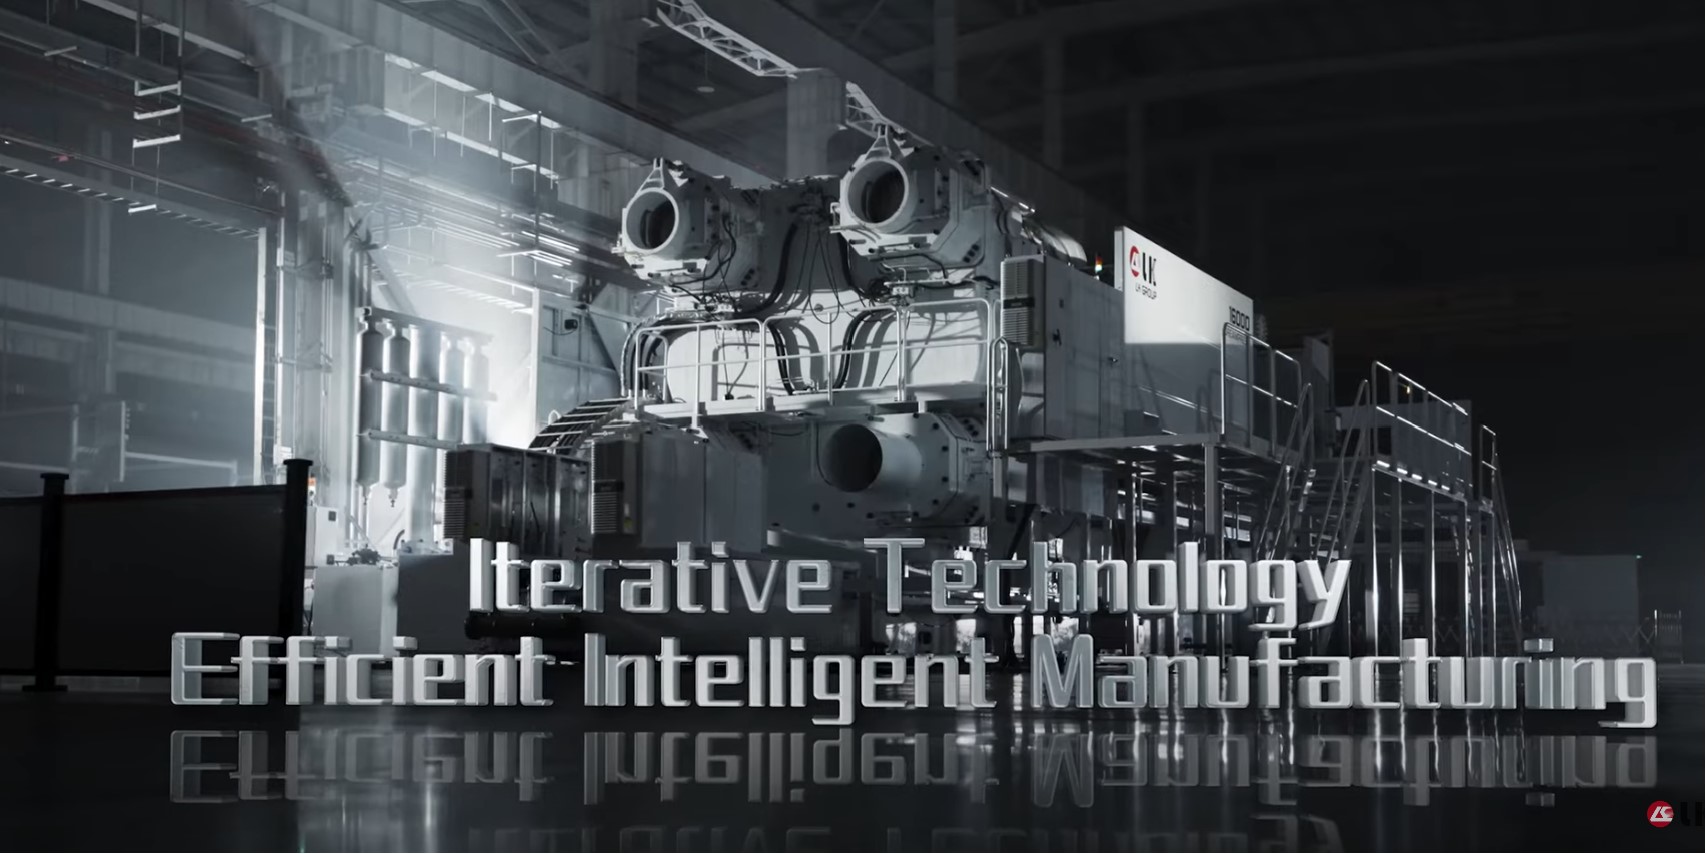 Giga Press - Iterative Technology and Efficient and Intelligent Manufacturing